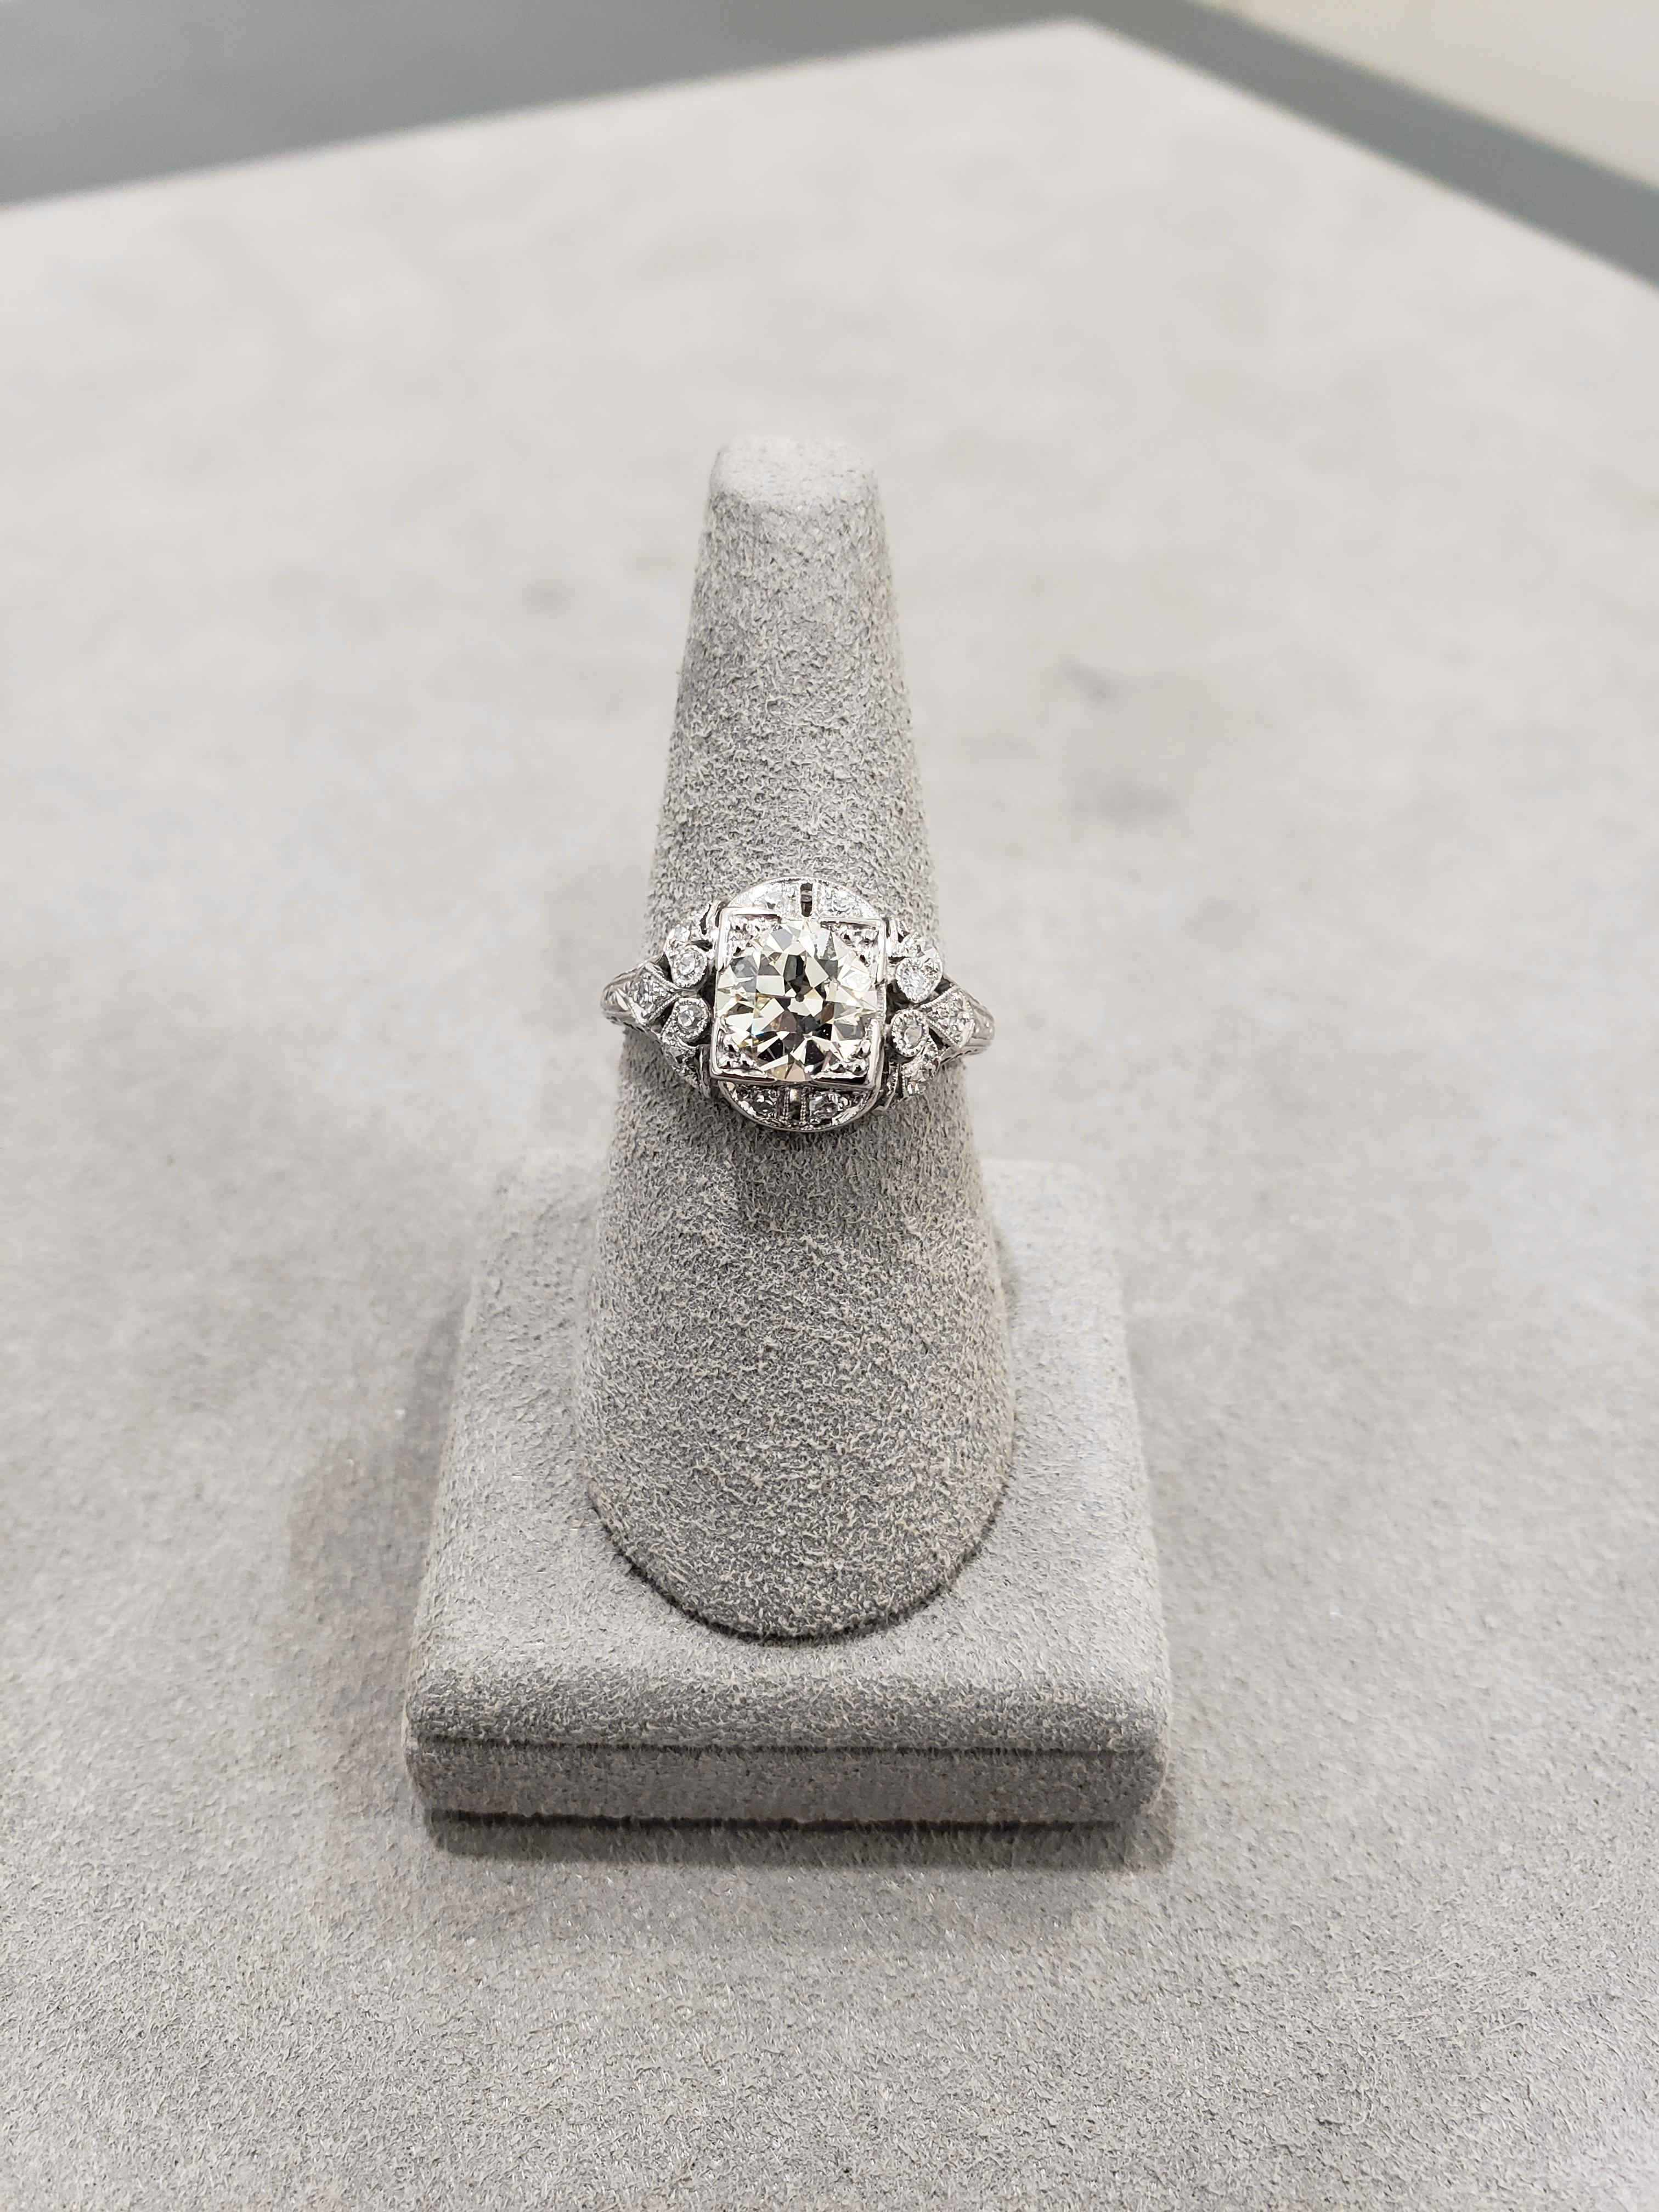 An Old-European Cut Diamond weighing 1.42 carats is spotlighted in this antique engagement ring. Set in an intricately-designed and handcrafted band accented with 0.22 carats total of diamonds. Size 7 US.

Style available in different price ranges.